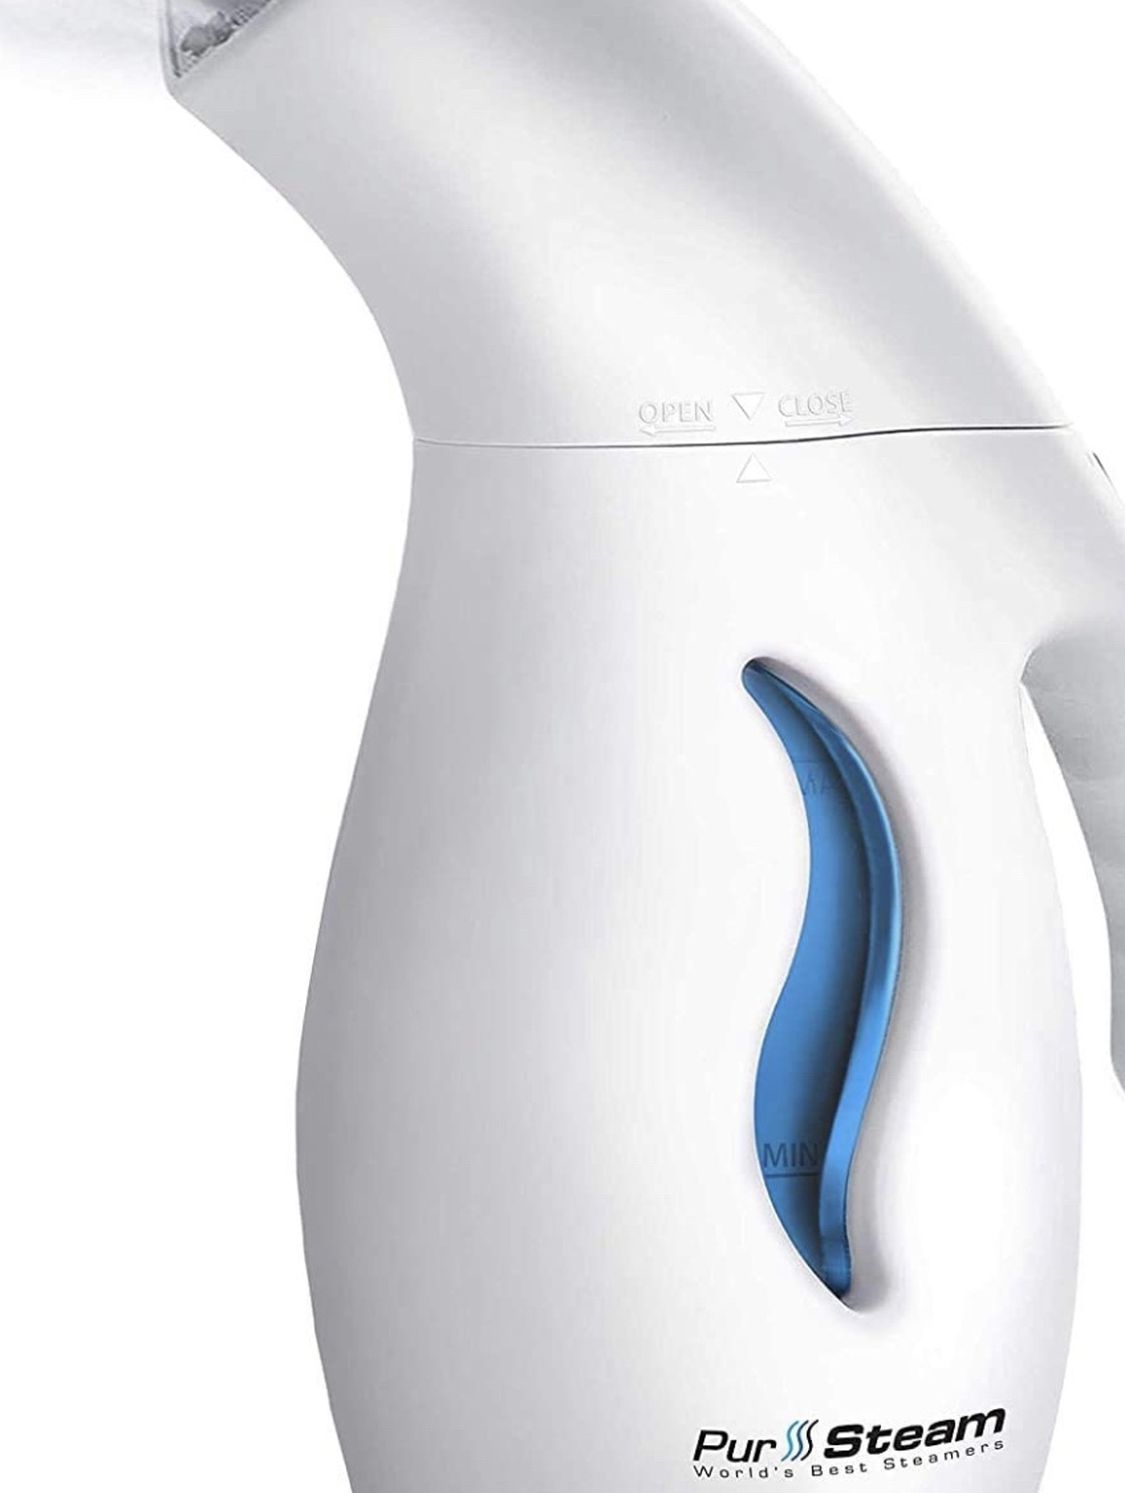 NEW! PurSteam Garment Steamer For Clothes, Powerful 7-1 Fabric Steamer For Home/Travel. Remove Wrinkles/Steam/Soften/Clean/and Defrost with UltraFast-